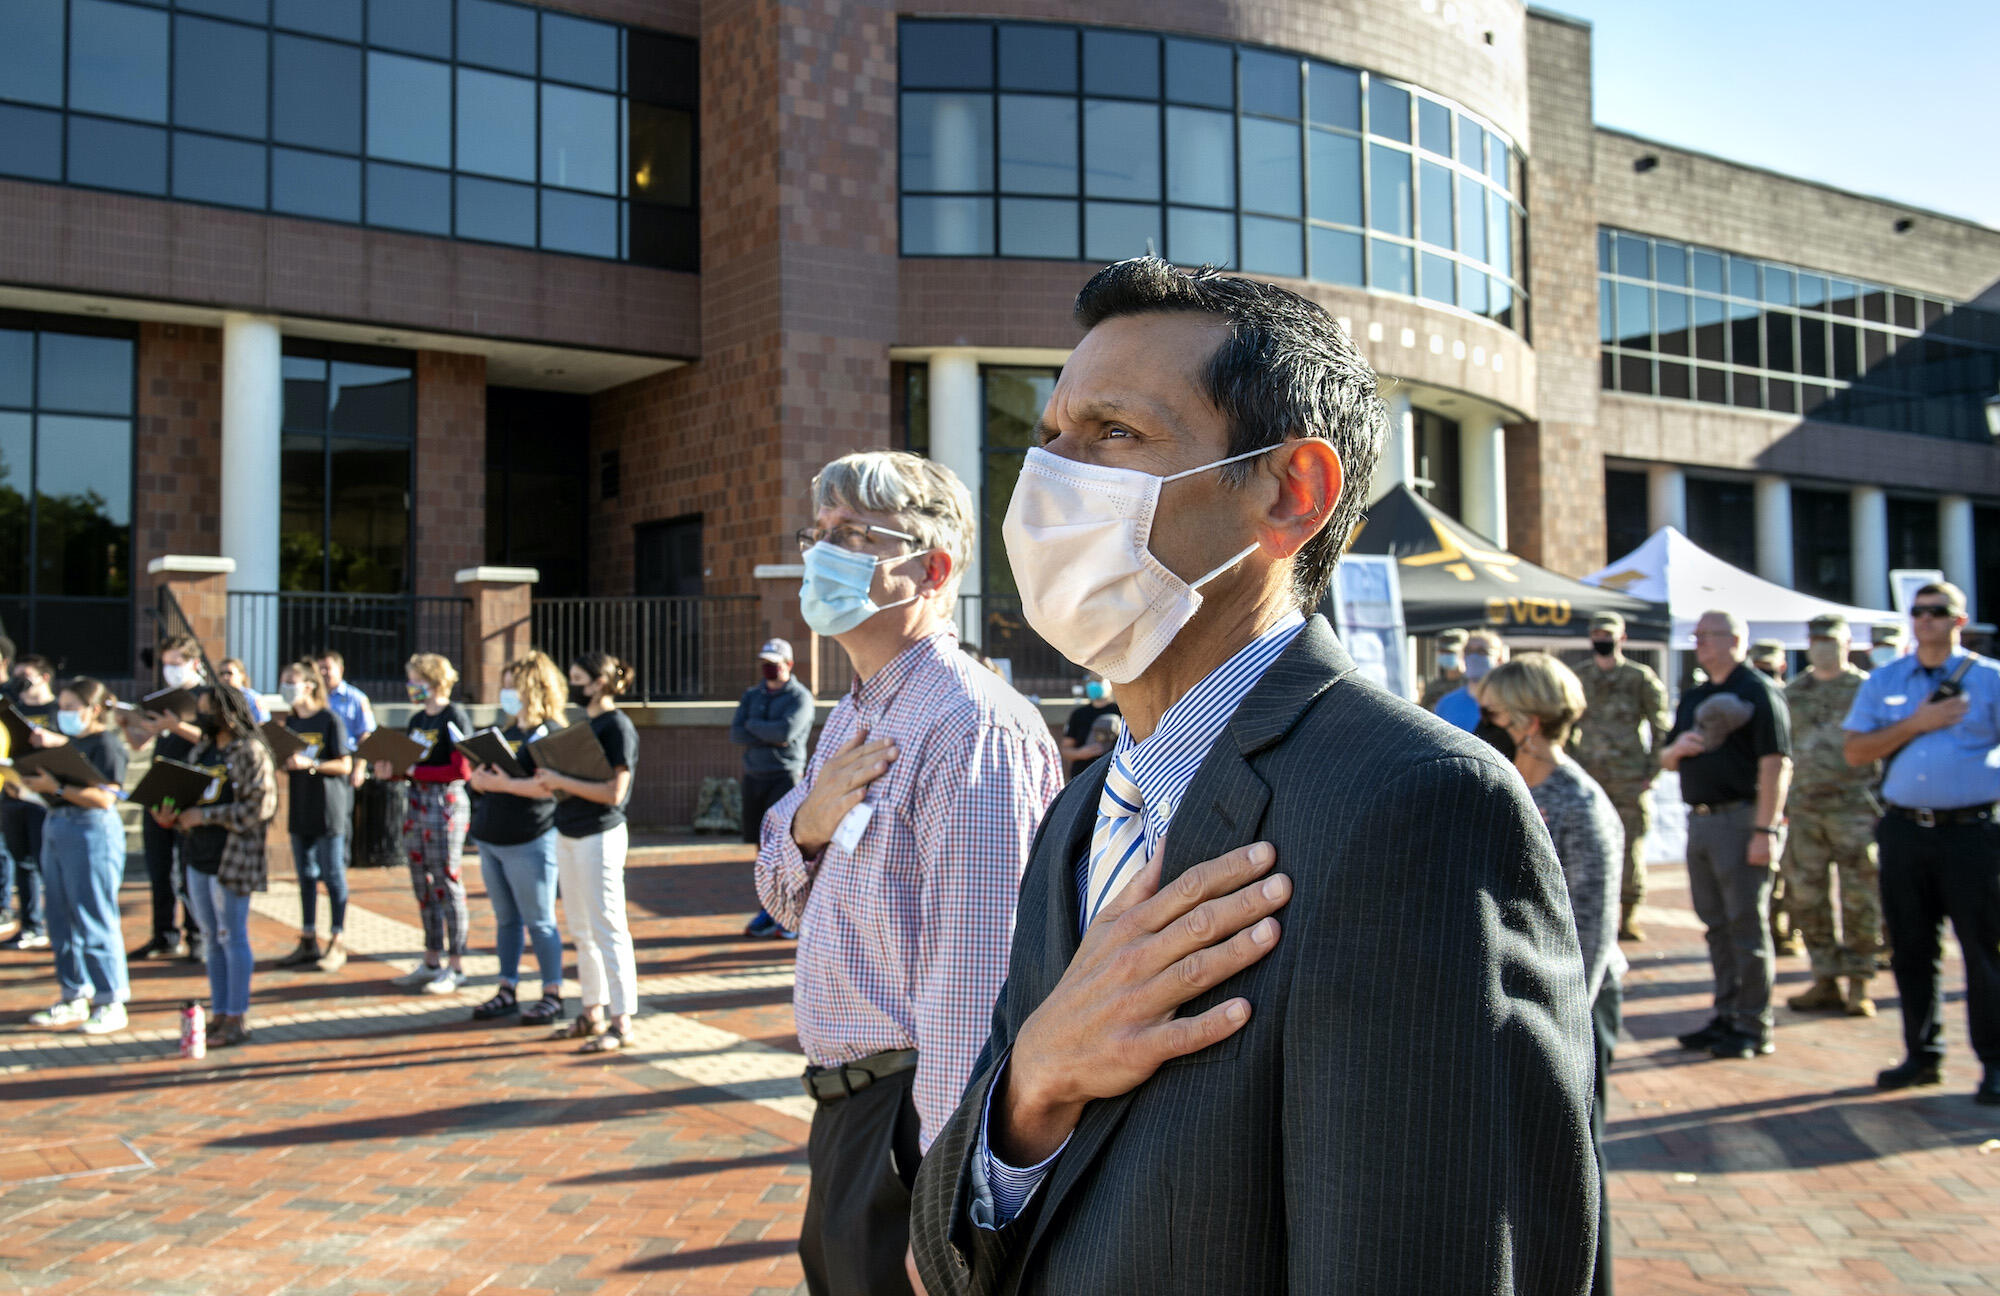 VCU President Michael Rao stands with his hand over his heart at a 9/11 anniversary event.